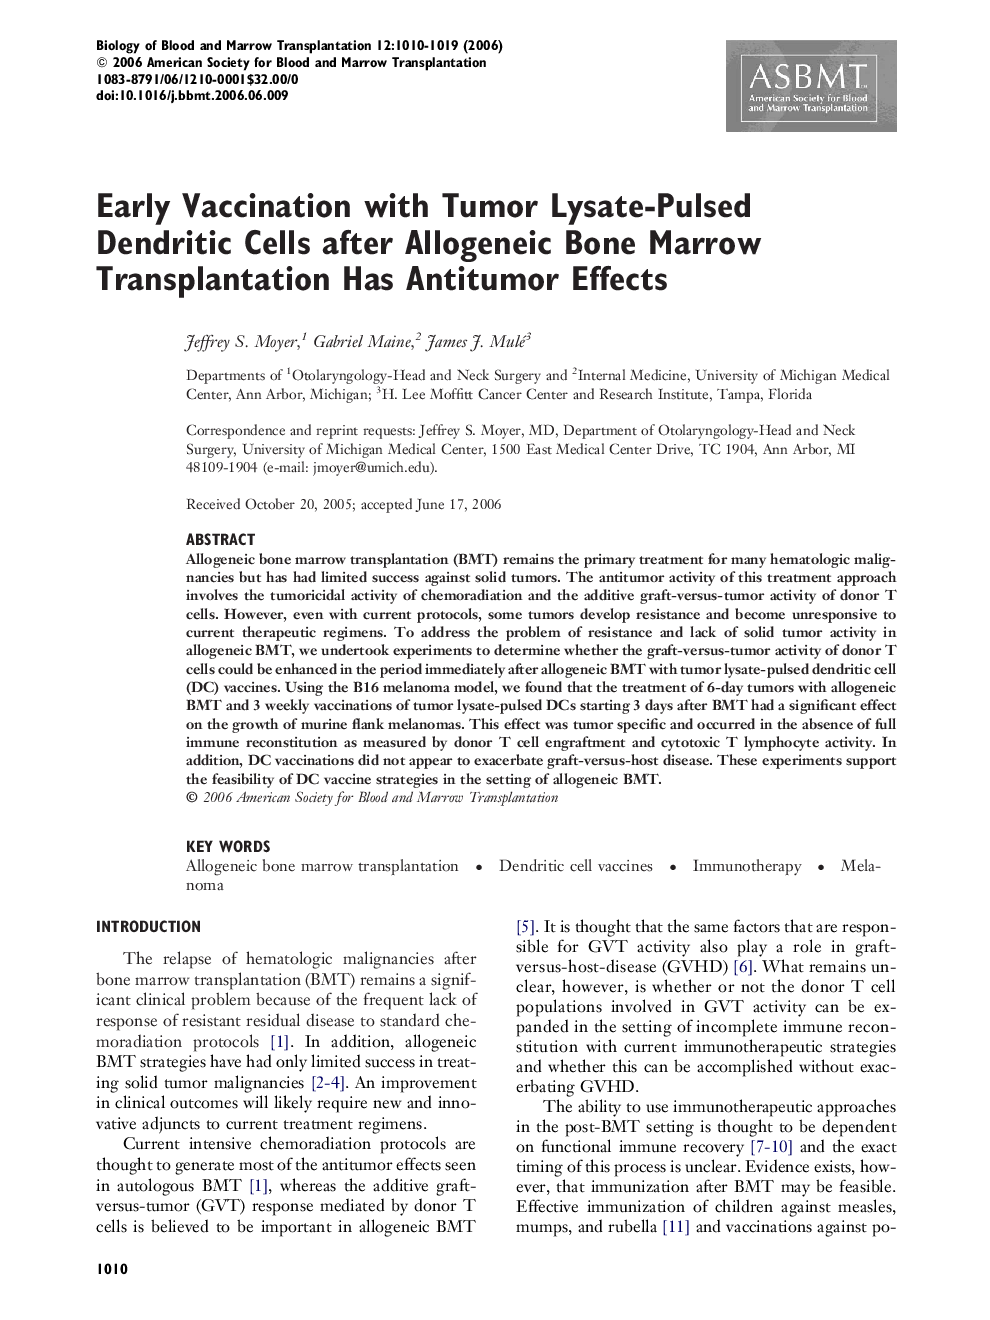 Early Vaccination with Tumor Lysate-Pulsed Dendritic Cells after Allogeneic Bone Marrow Transplantation Has Antitumor Effects